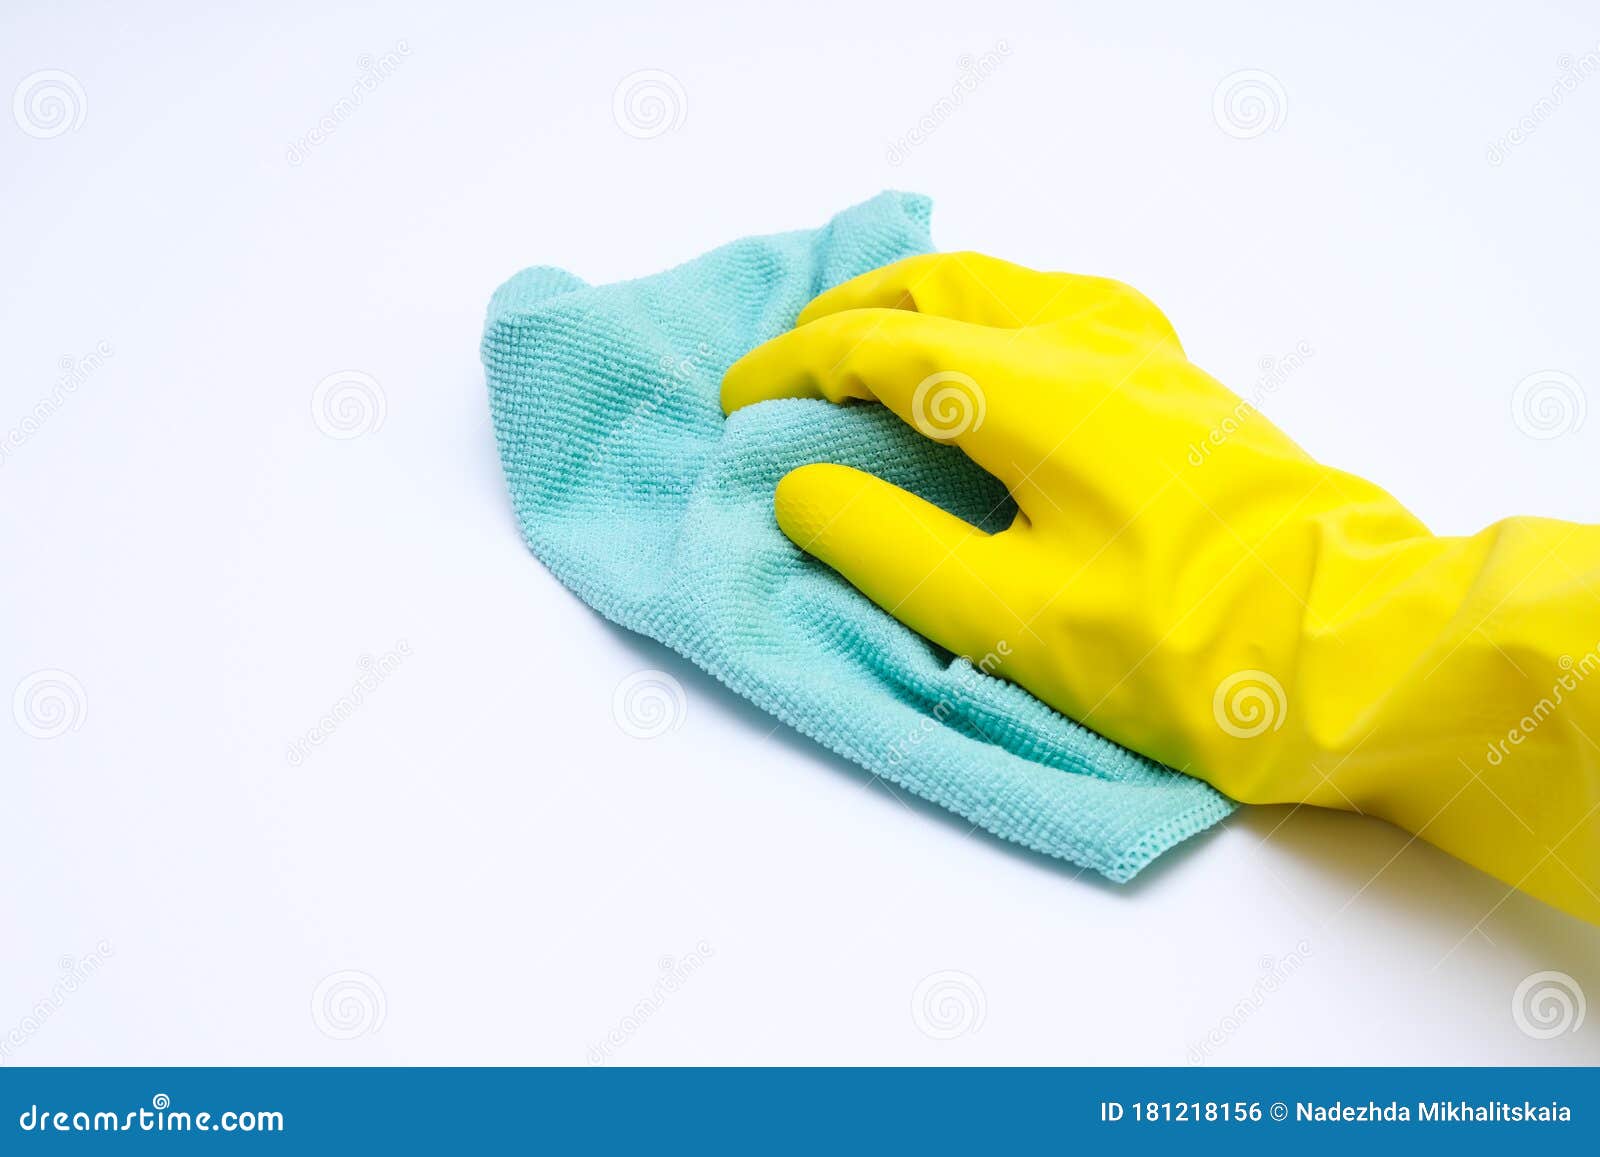 Dusting Gloves, Household Cleaning Gloves For Dusting, Microfiber Dusting  Cloths